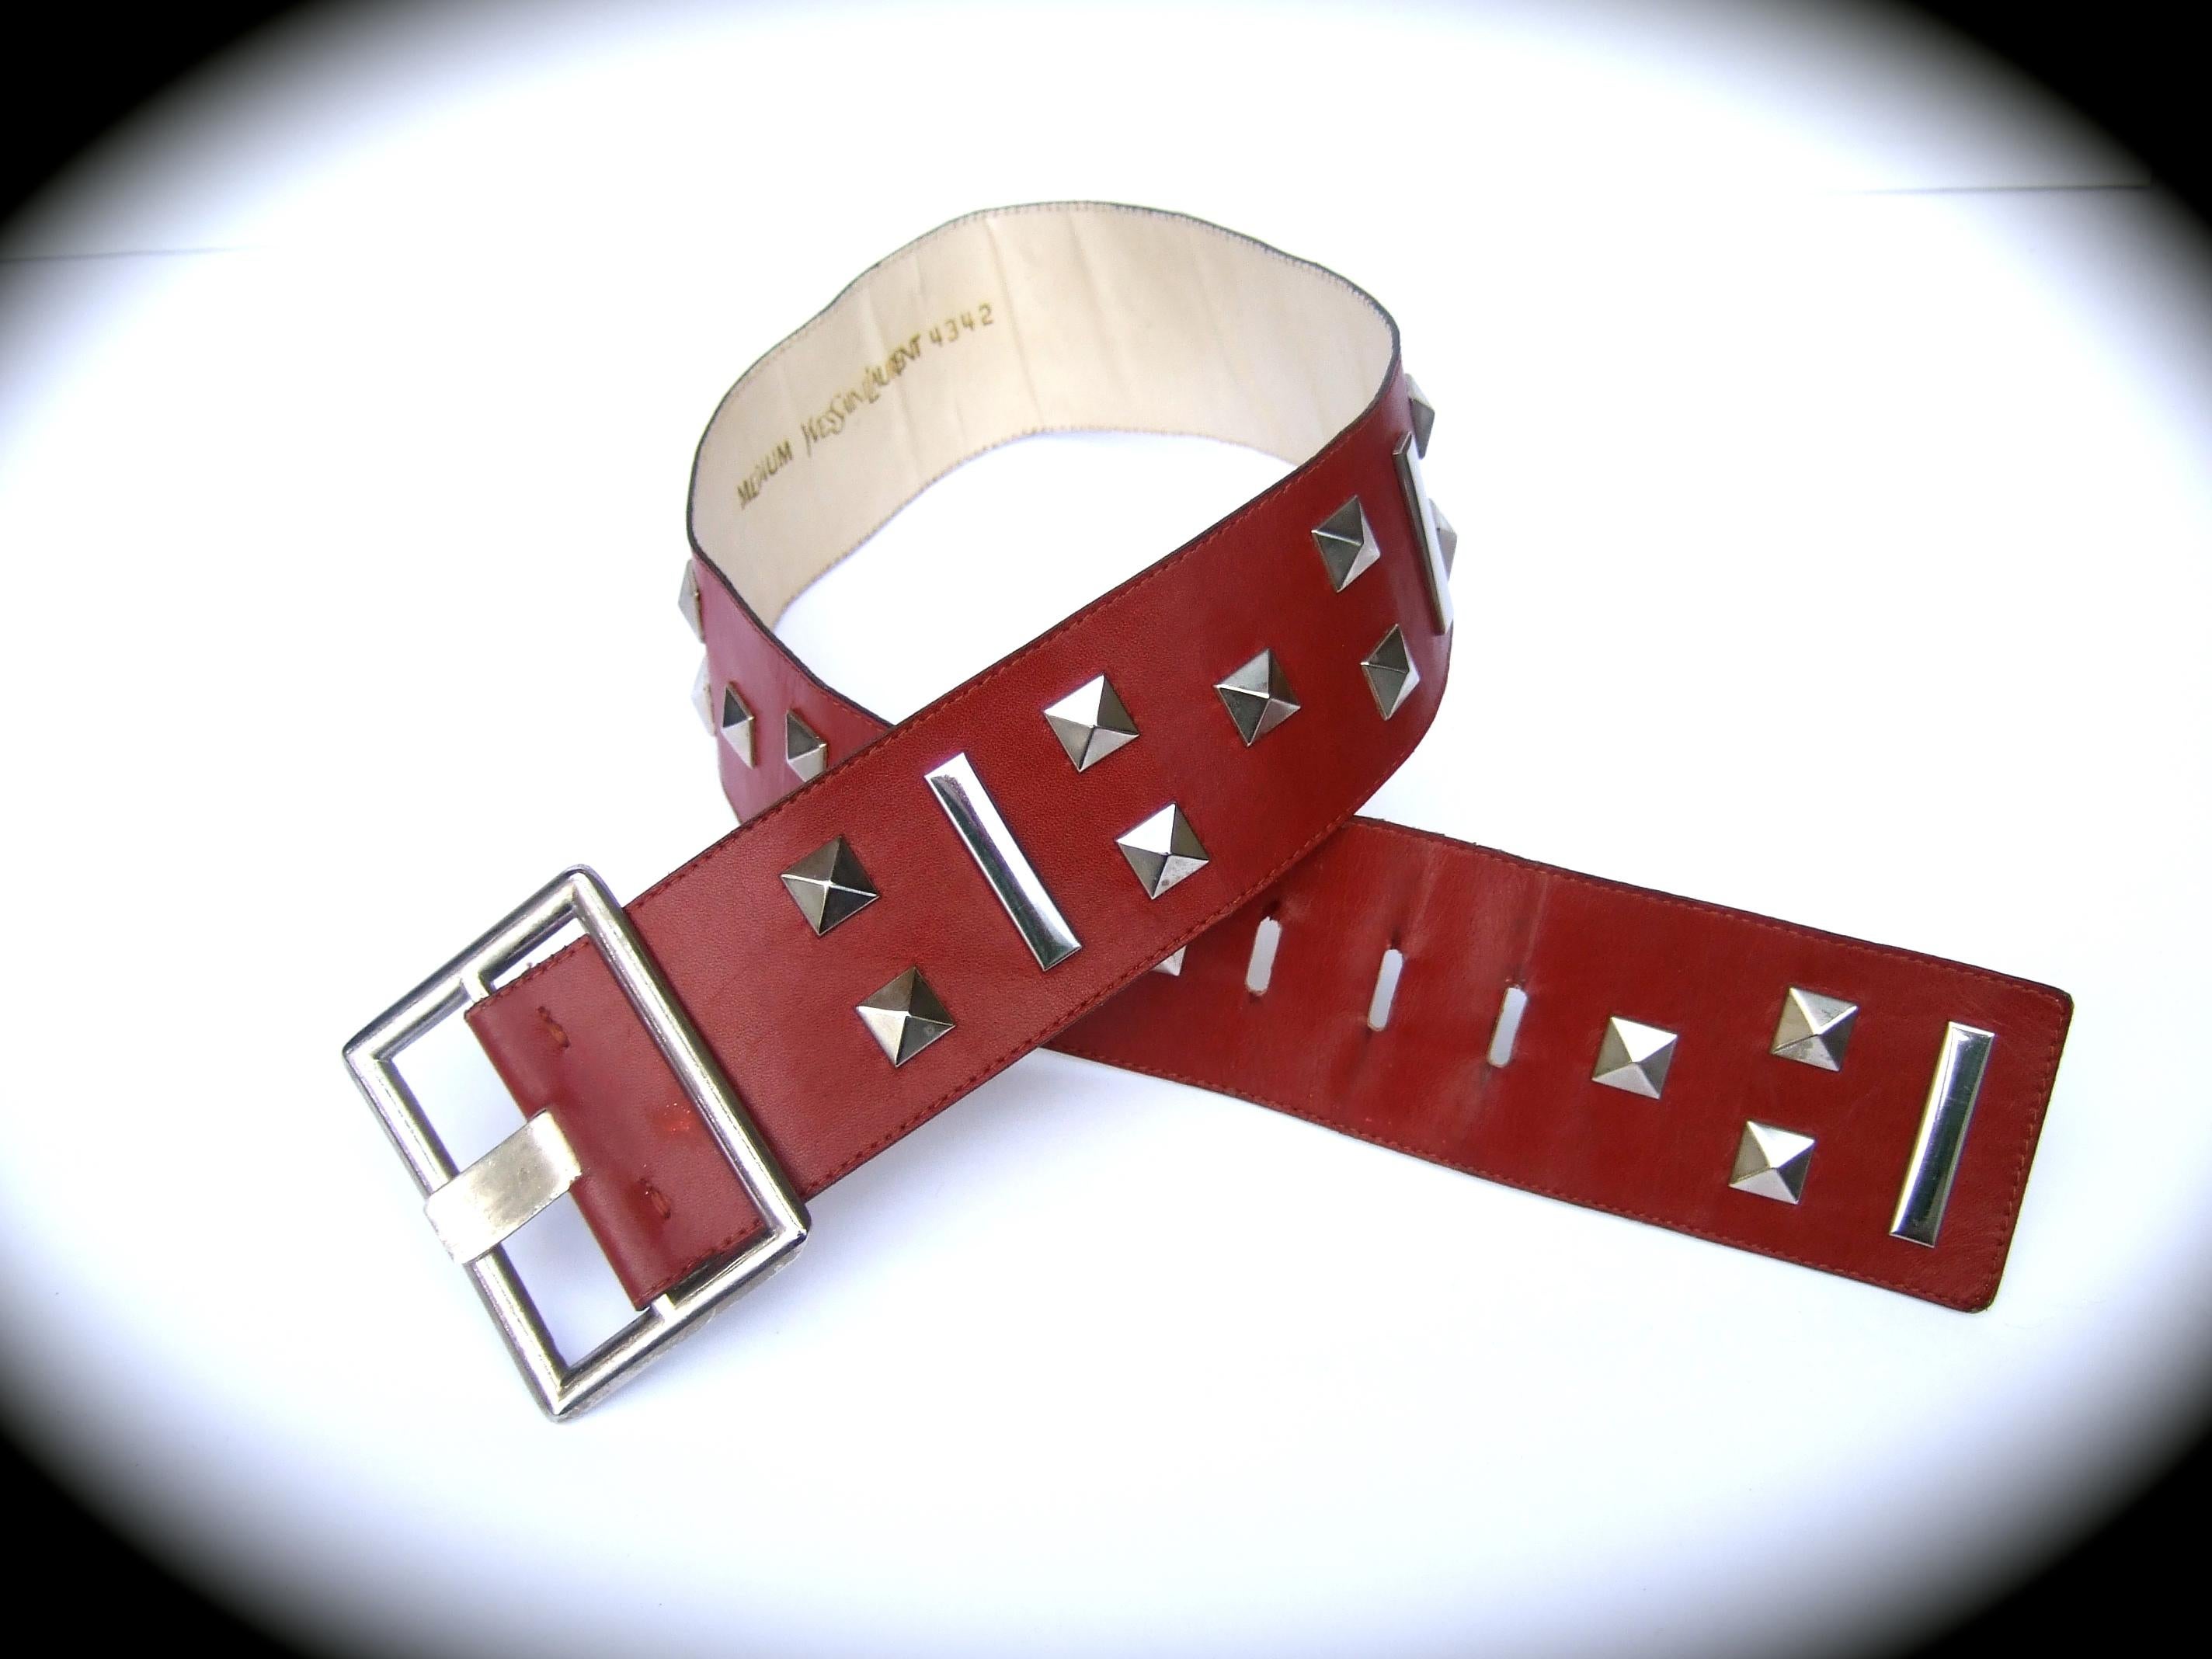 Yves Saint Laurent Red leather chrome grommet studded belt c 1970s

The wide dark red leather belt is designed with a series of chrome metal grommets; juxtaposed with rectangular vertical metal embellishments. Paired with a large chrome metal